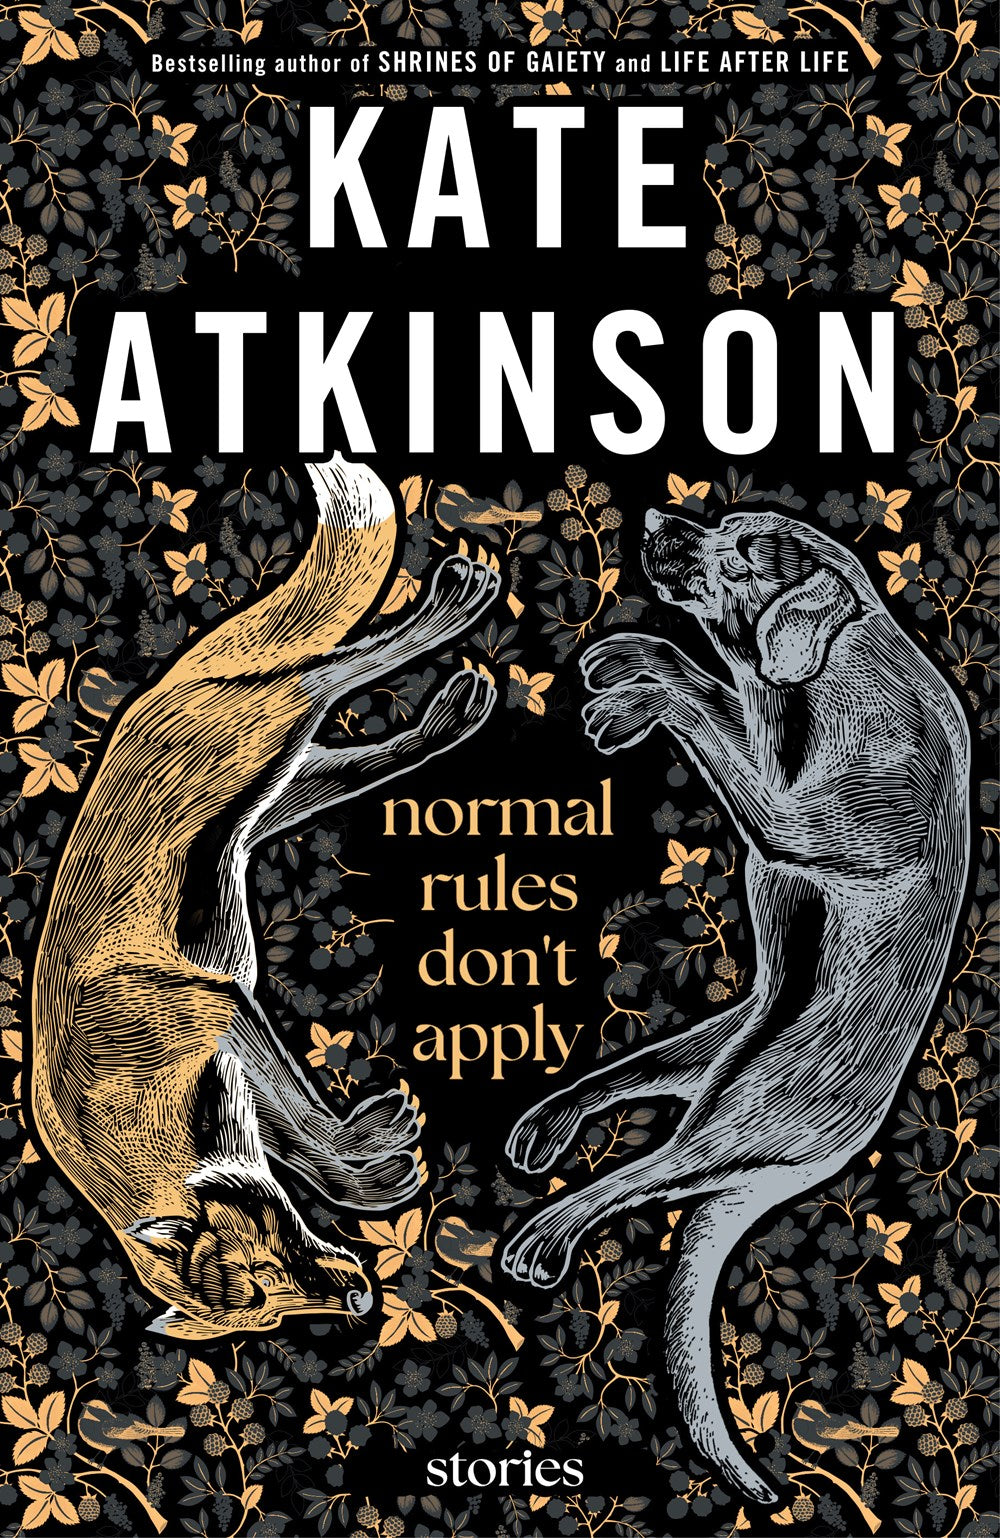 Normal Rules Don't Apply: Stories by Kate Atkinson (9/12/23)